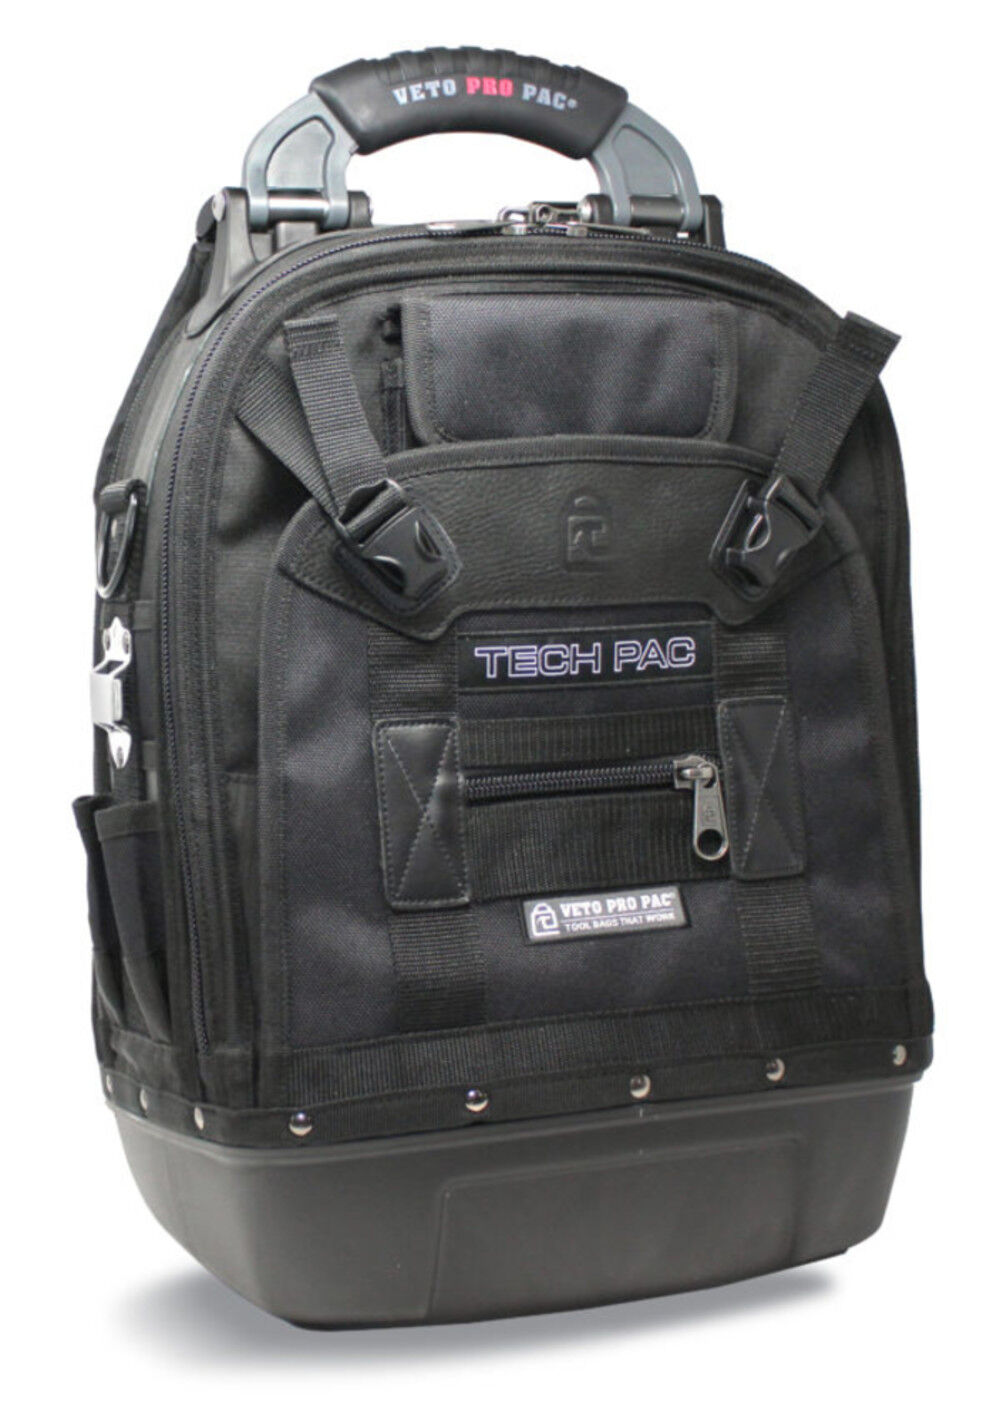 Veto Pro Pac Tech Pac Blackout Large Tool Backpack with Removable Inserts  TECH PAC BLACK (OUT) - Acme Tools